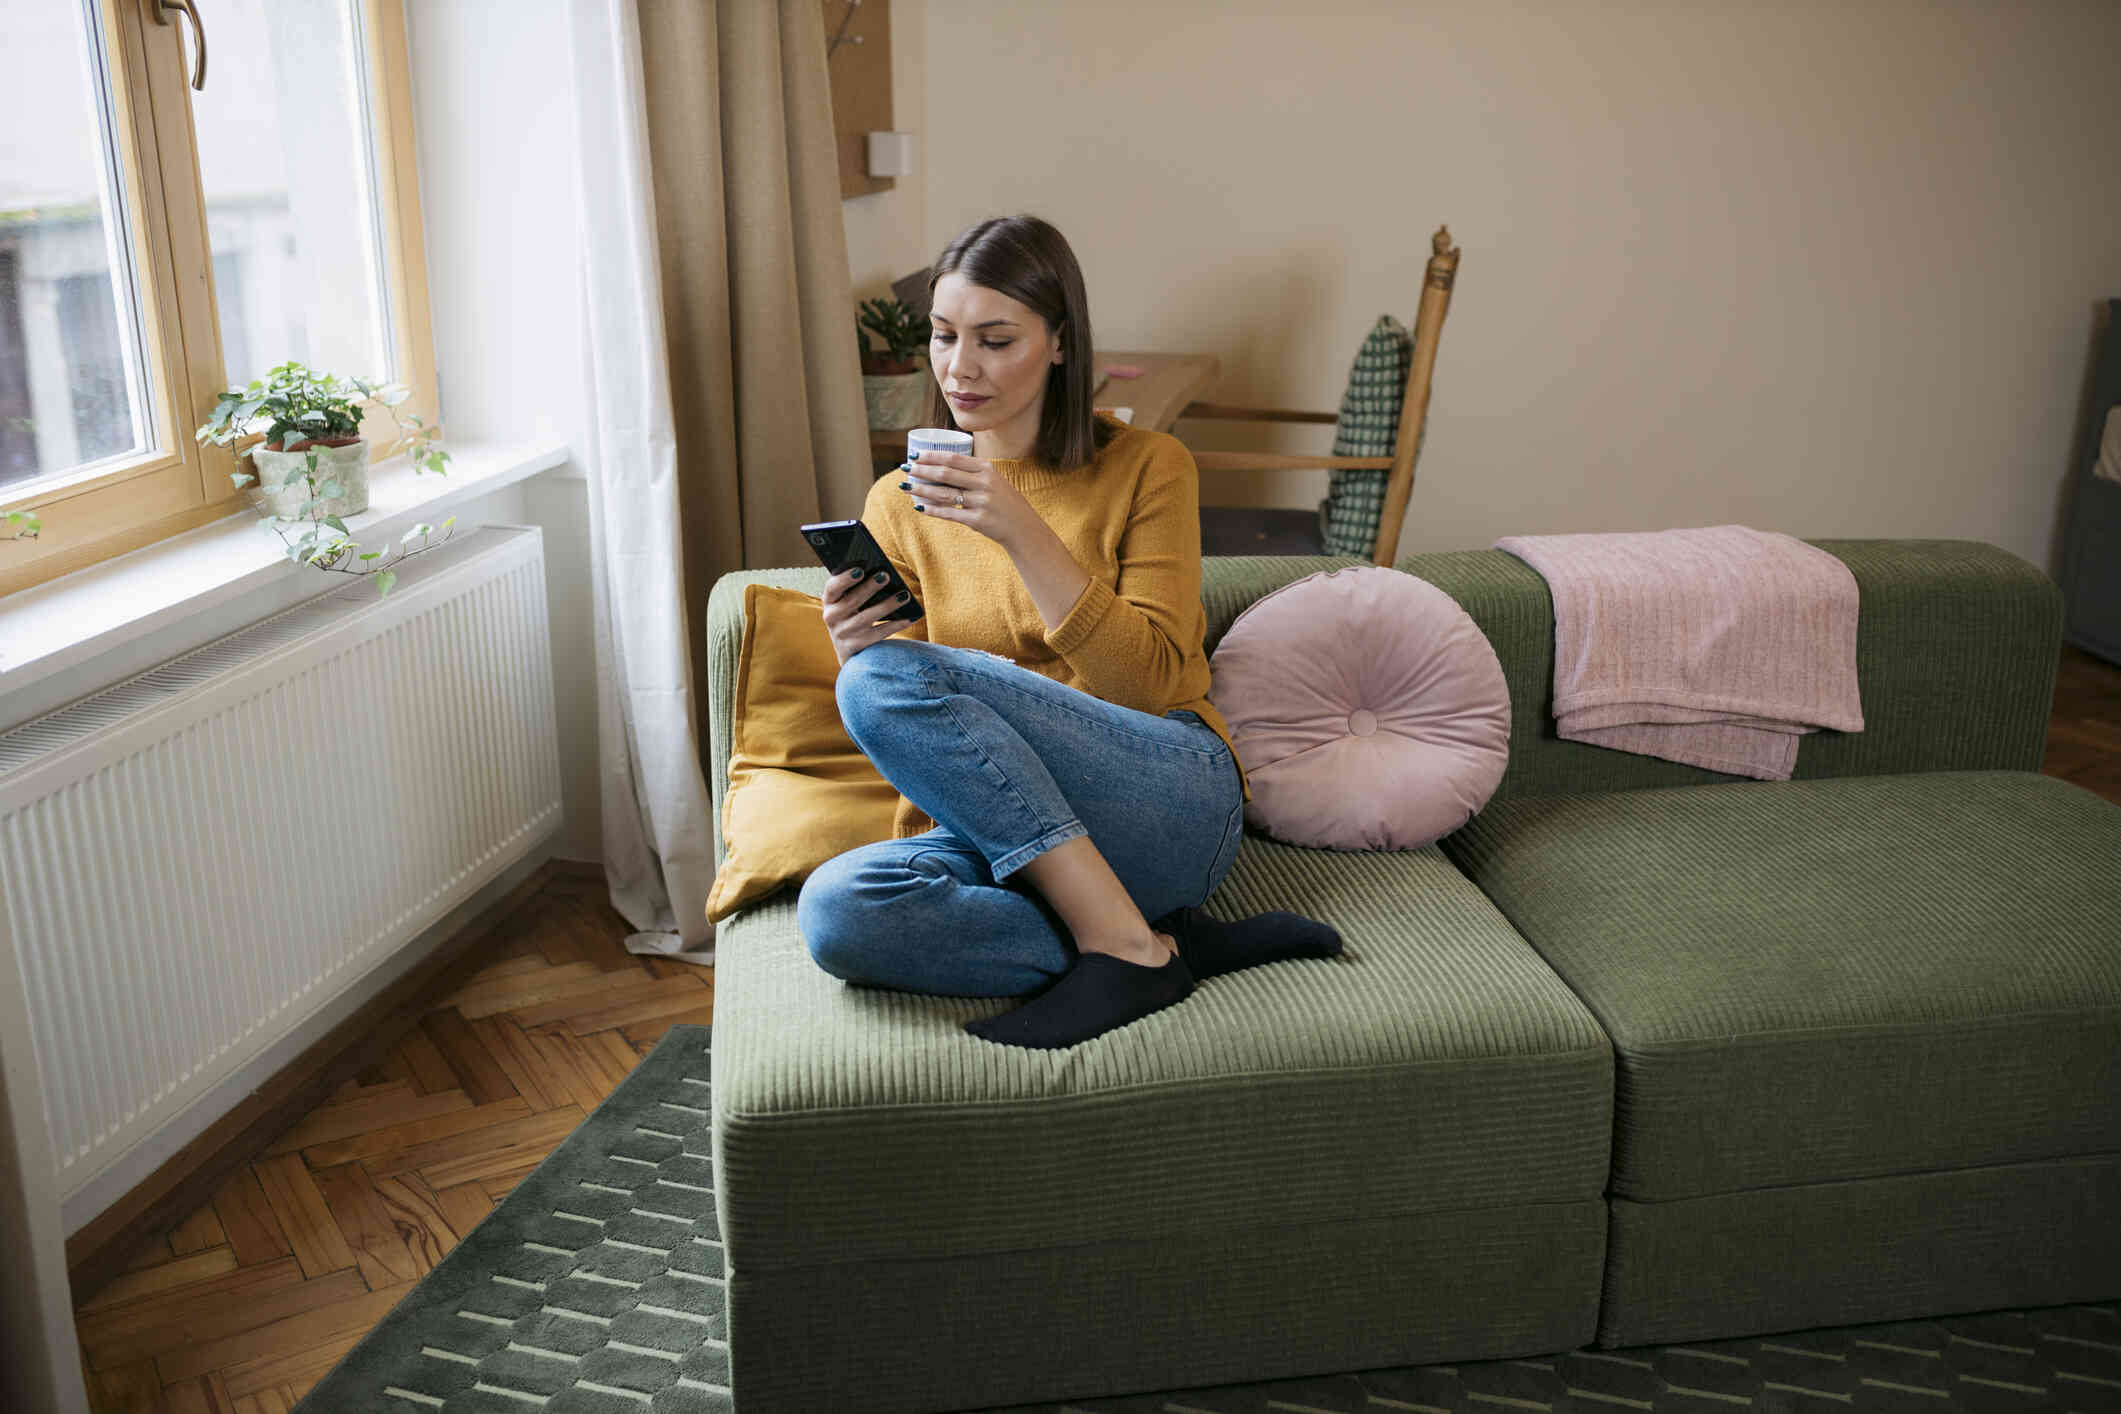 A woman in a yellow shirt sits curcled up on the couch with a coffee mug in her hand as she looks down at the phone in her hand.